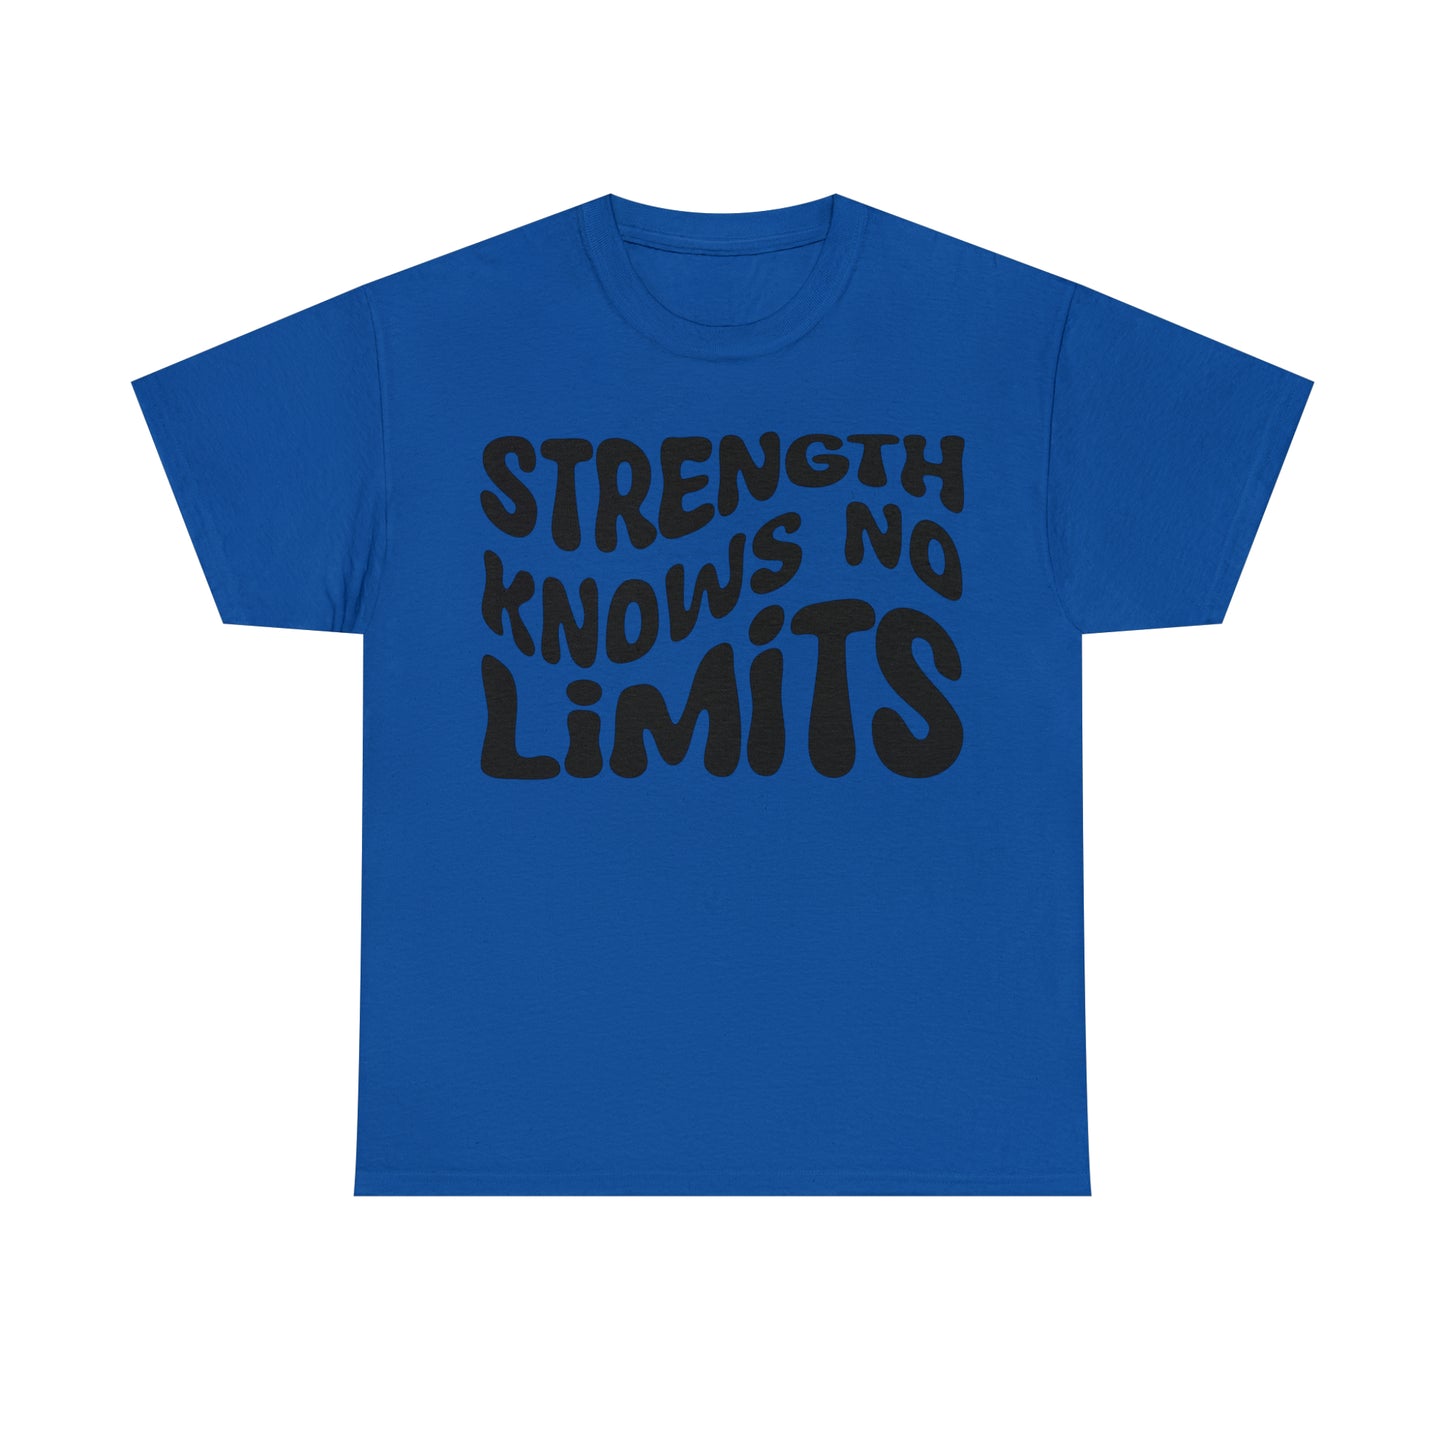 "Strength knows no limits" T-shirt